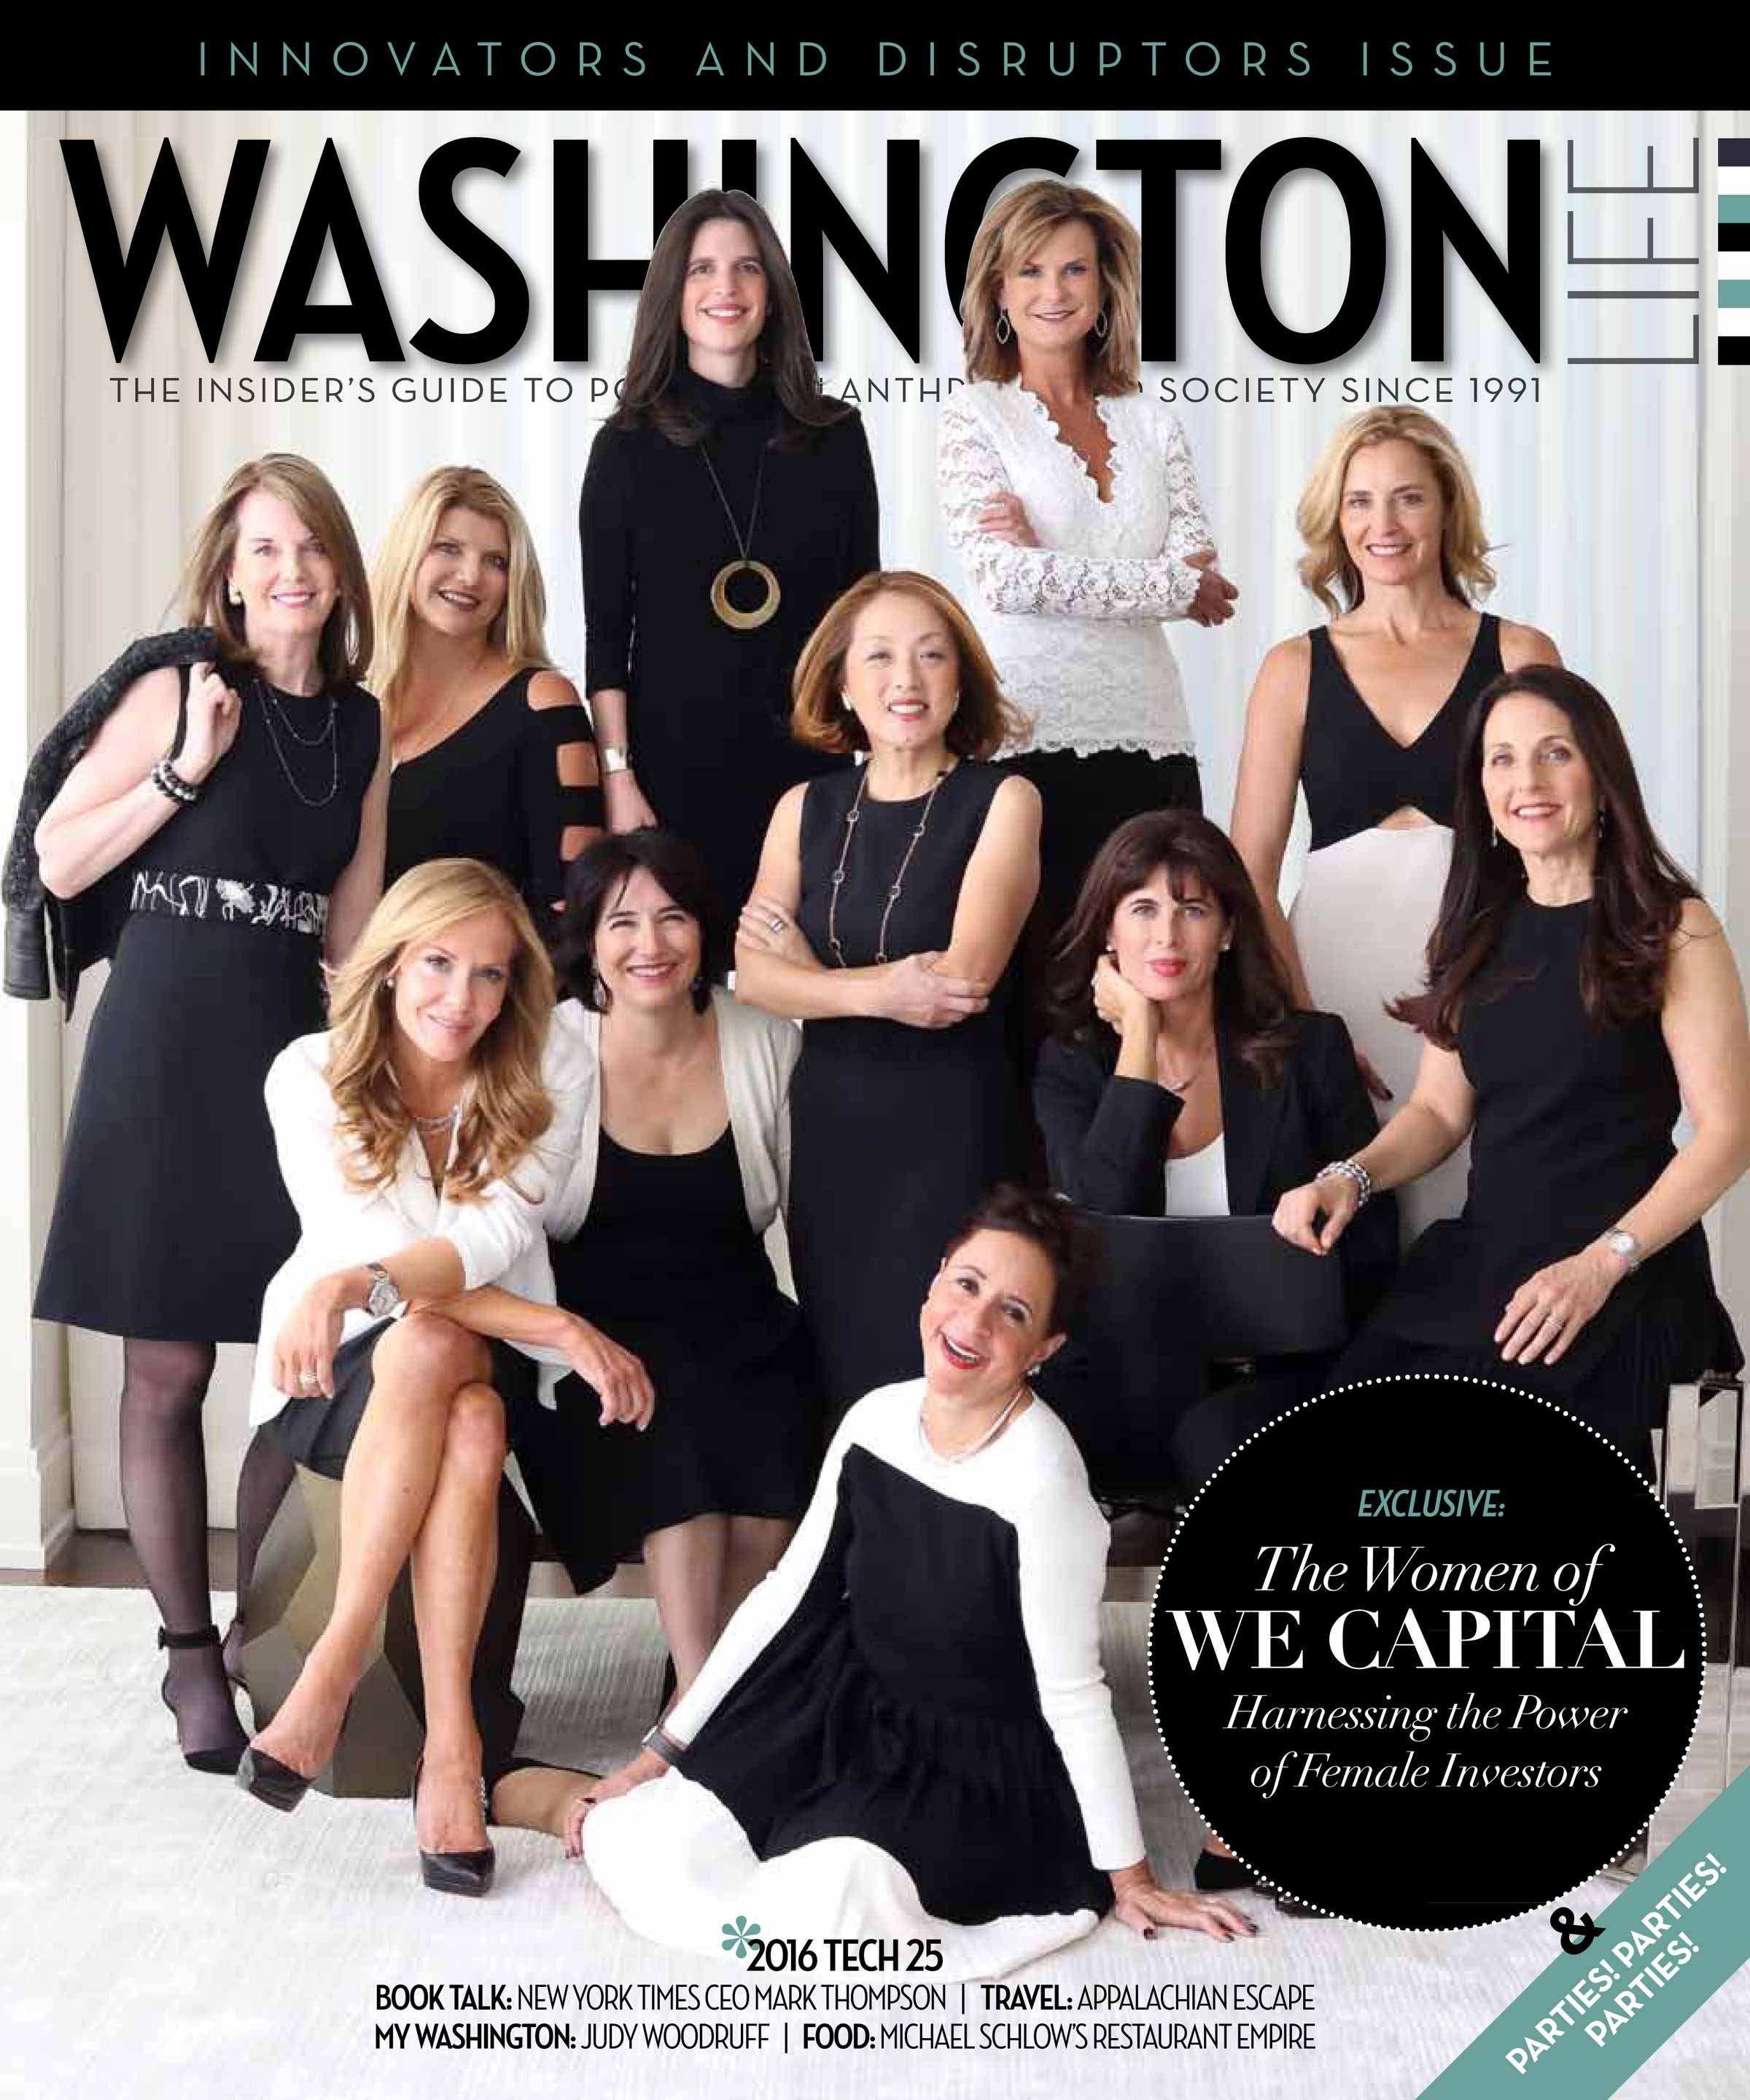 Washington Women Lead and Lean In with Investment